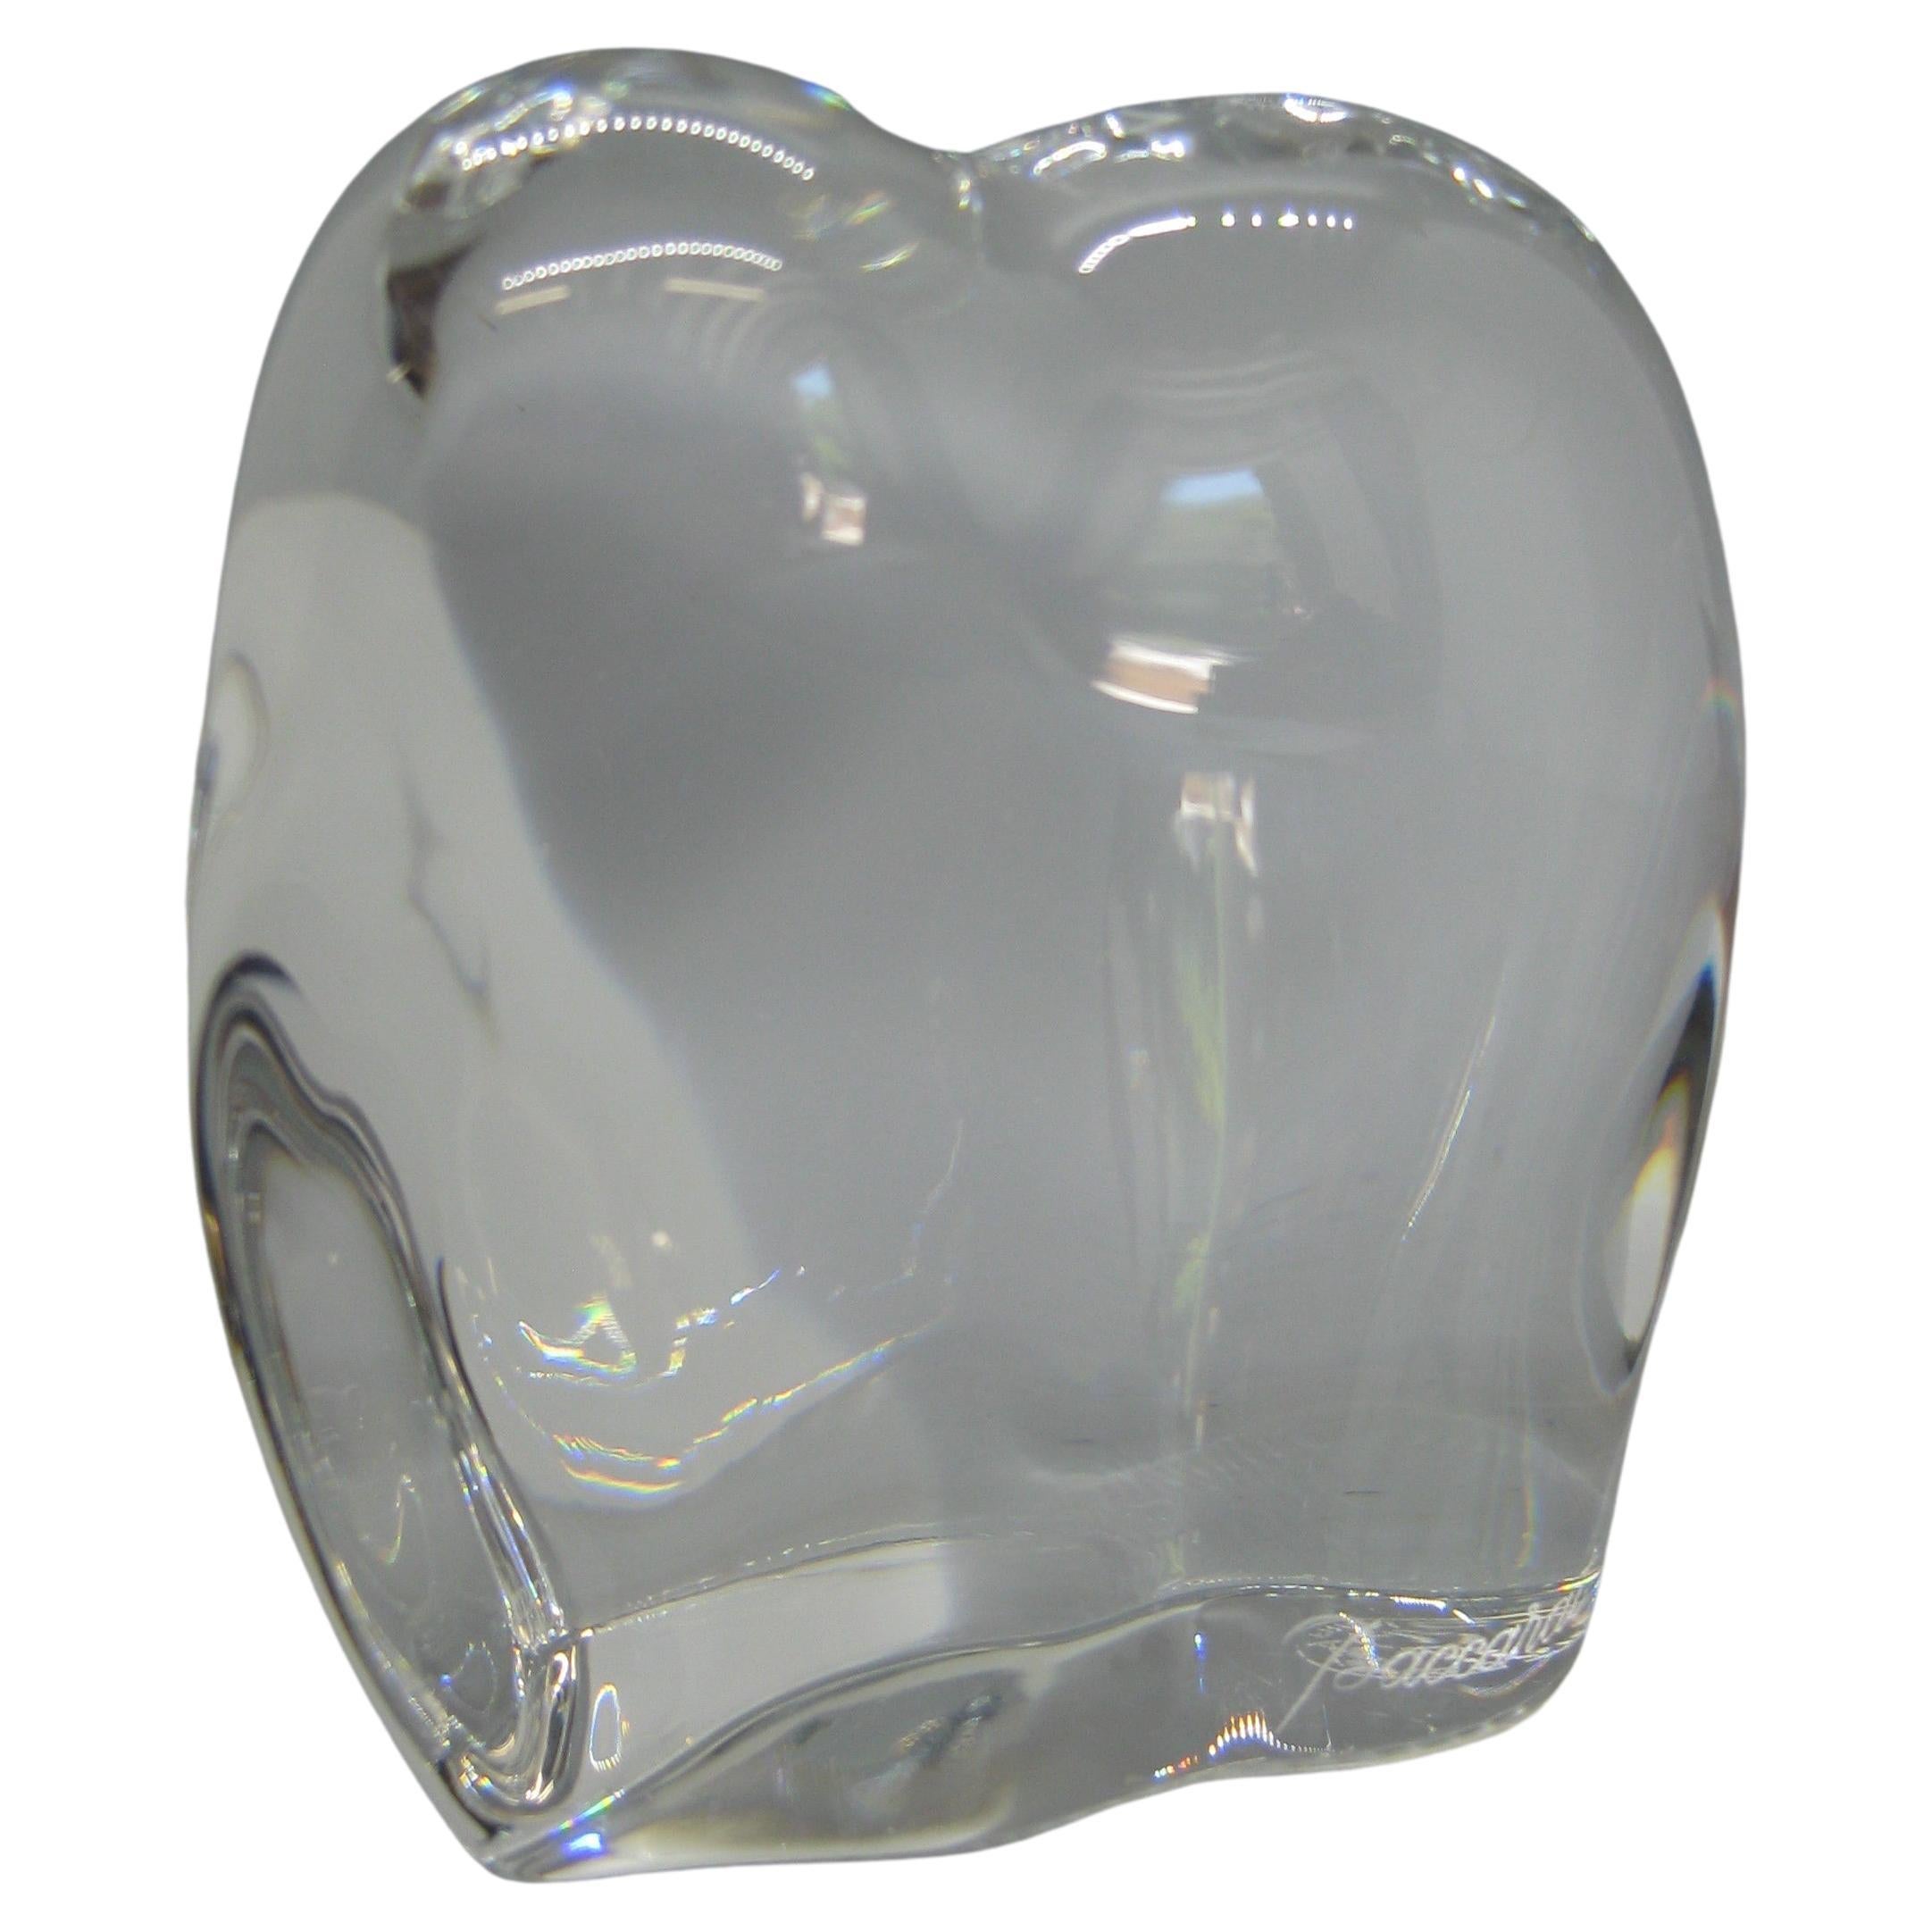 Baccarat Crystal Modernist Asian Elephant Sculpture Paperweight Figurine France For Sale